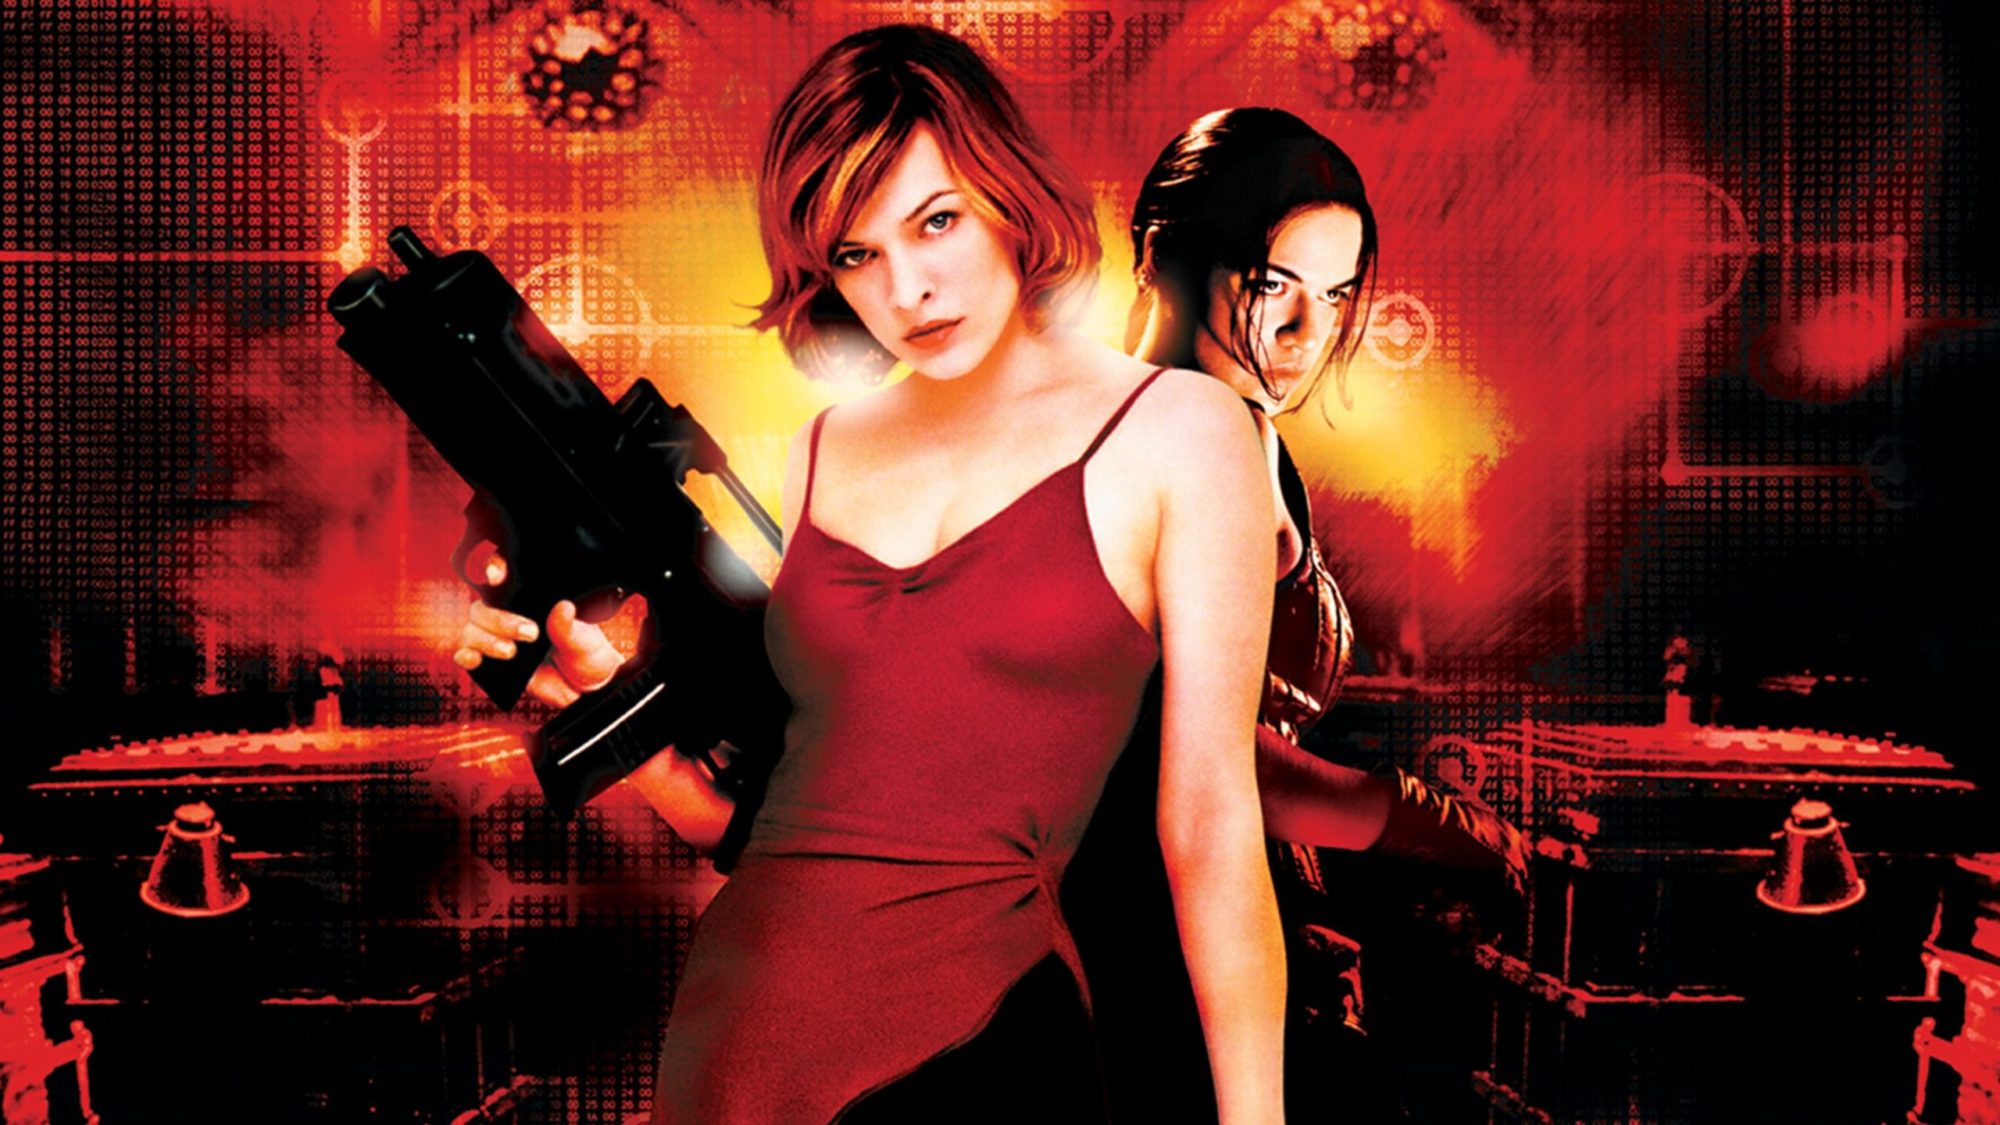 What Nightmares May Come: How the Resident Evil Films and Games